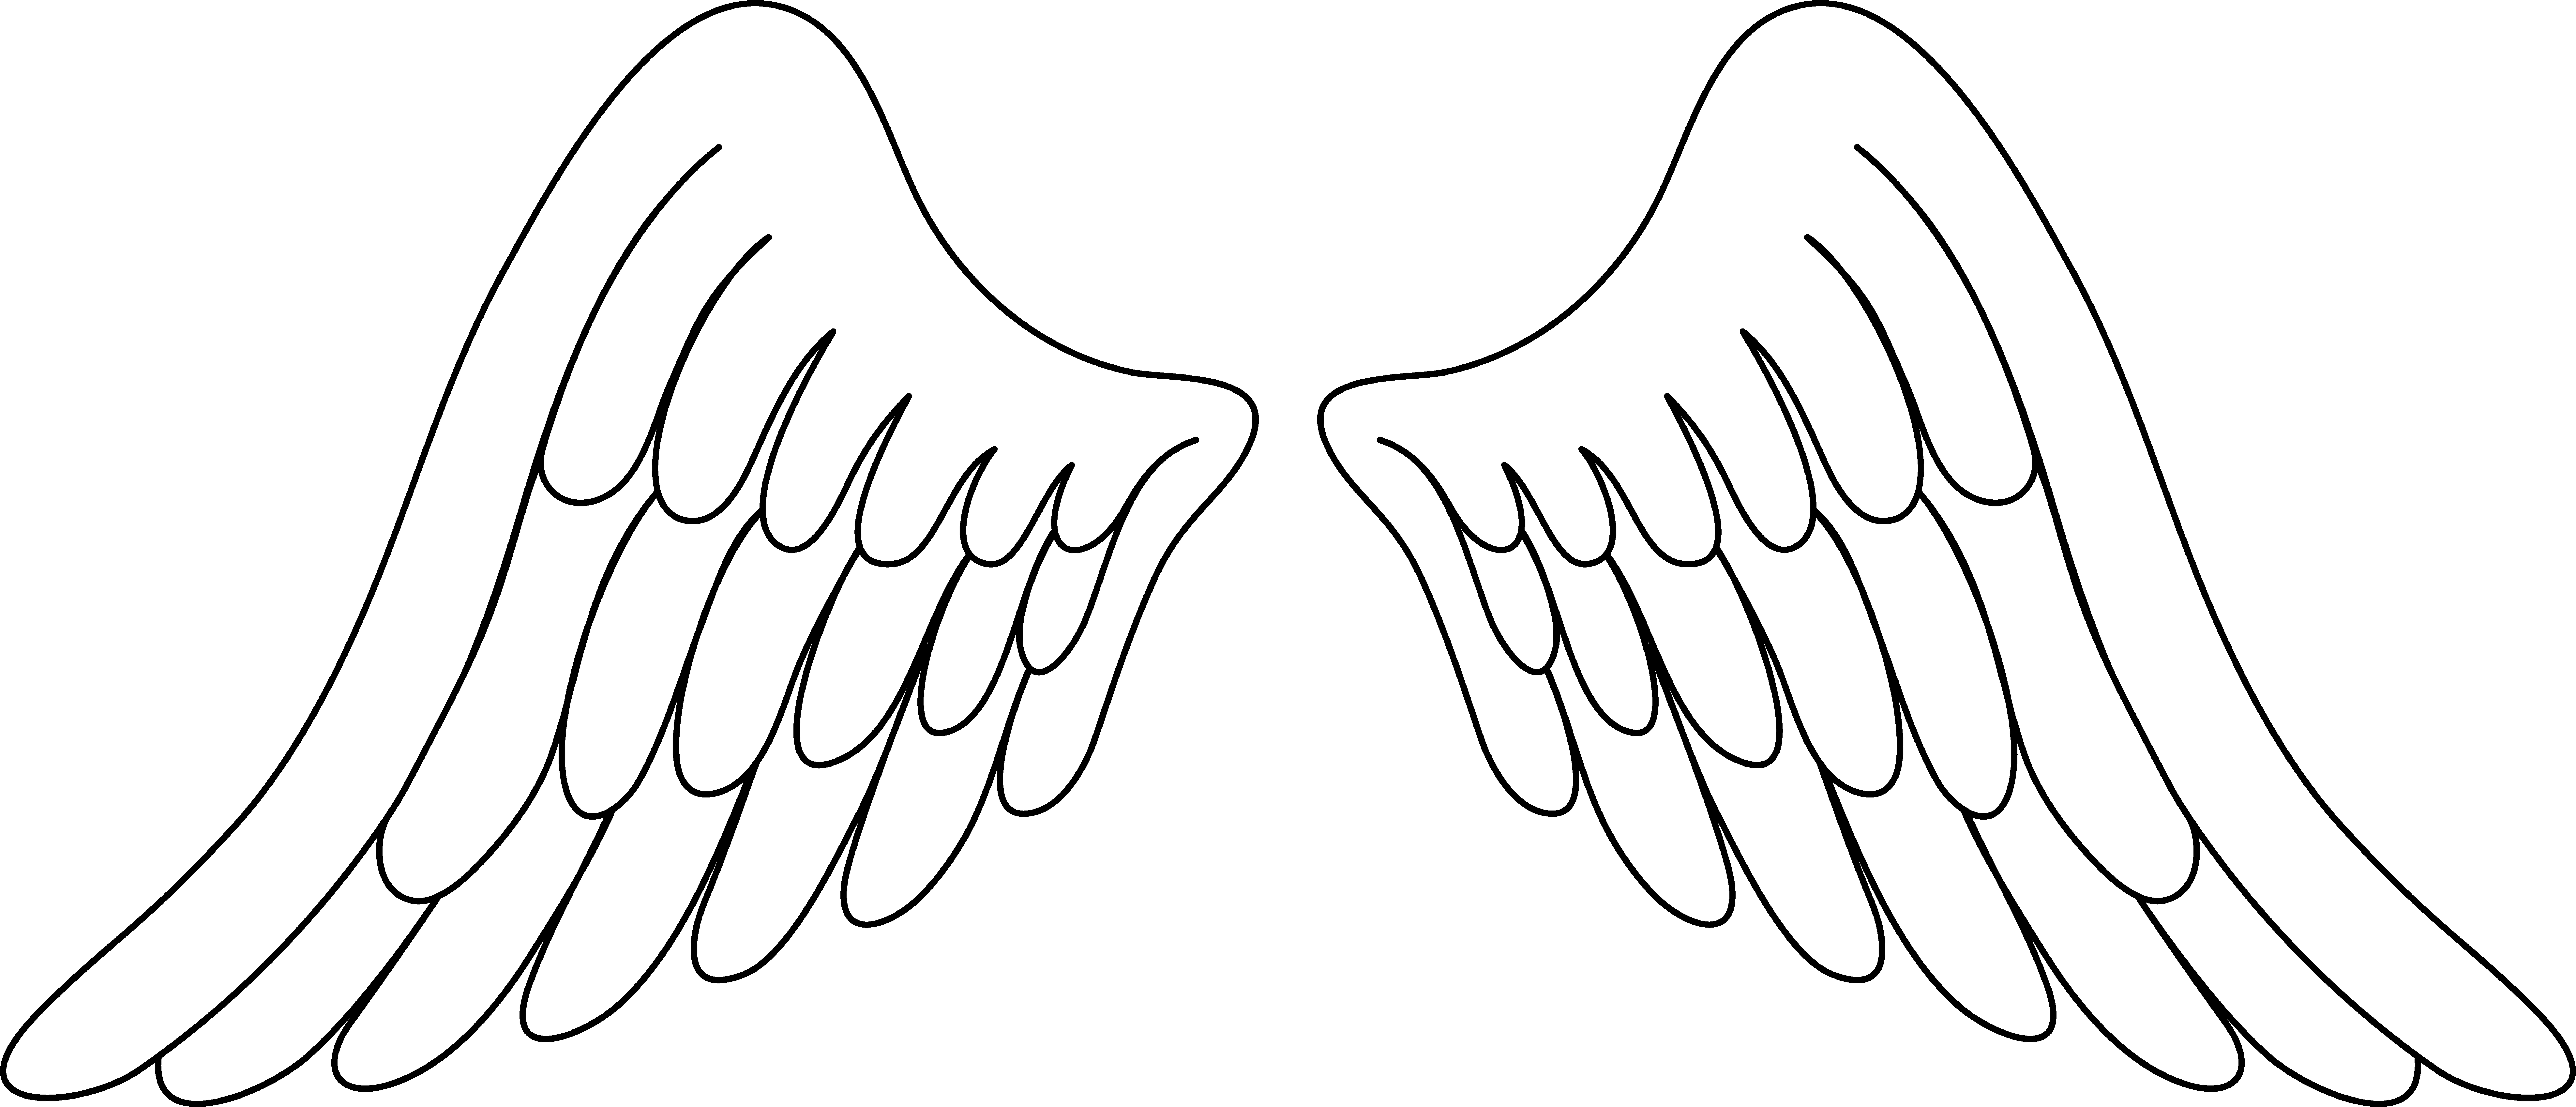 Angel wings wing clip. Warrior clipart angels